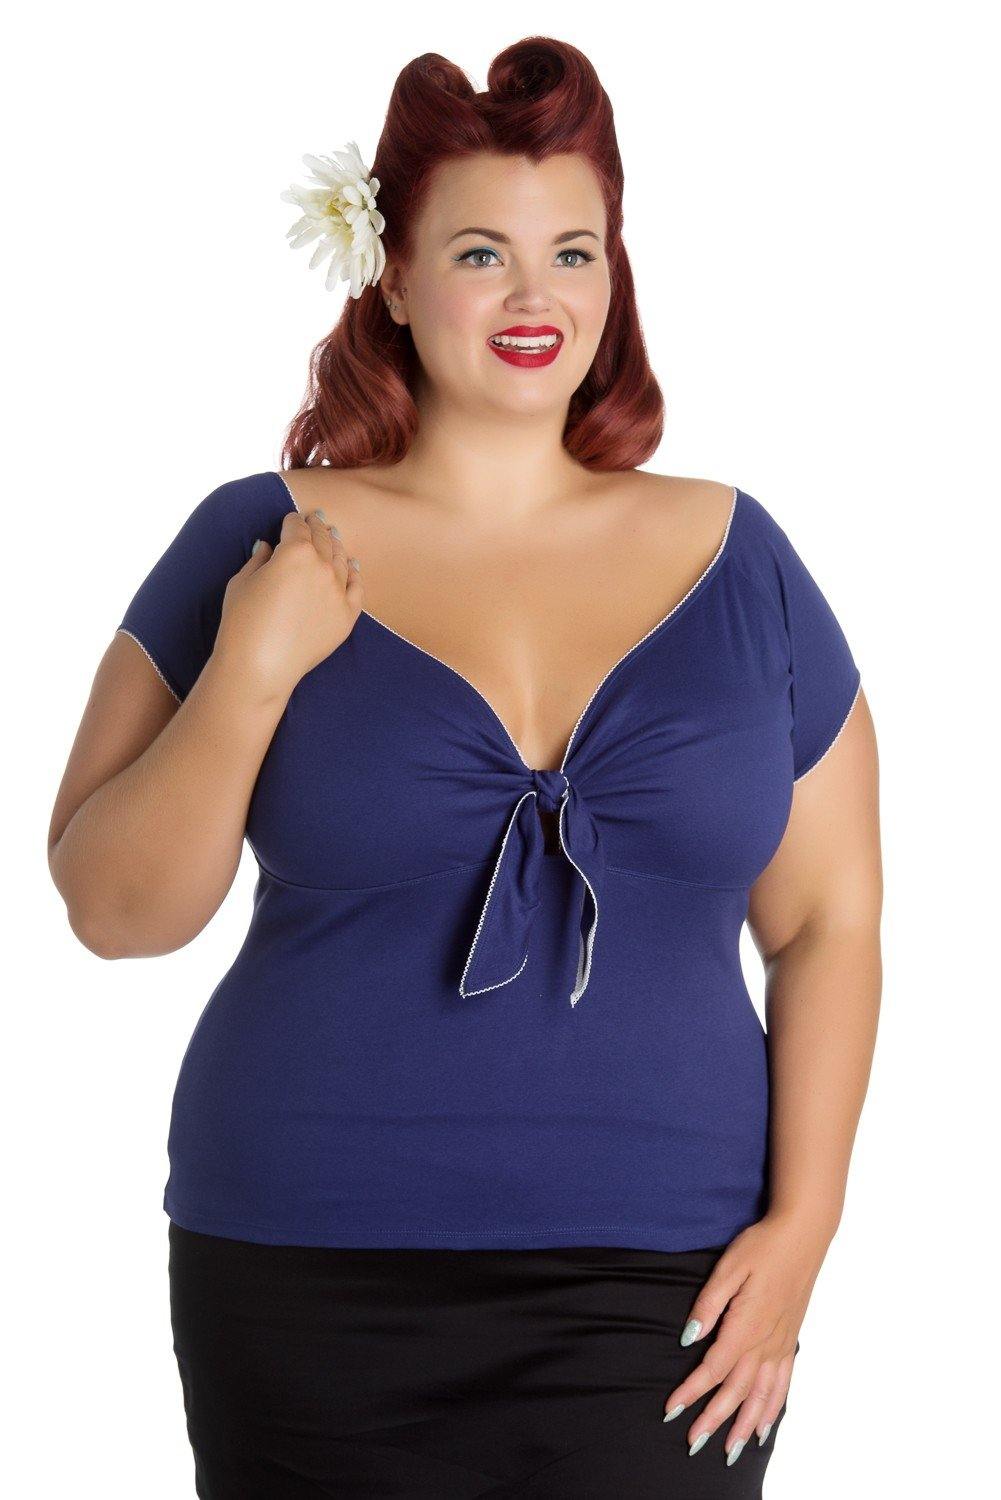 How to Dress Your Plus Size Body Shape in Vintage Clothing